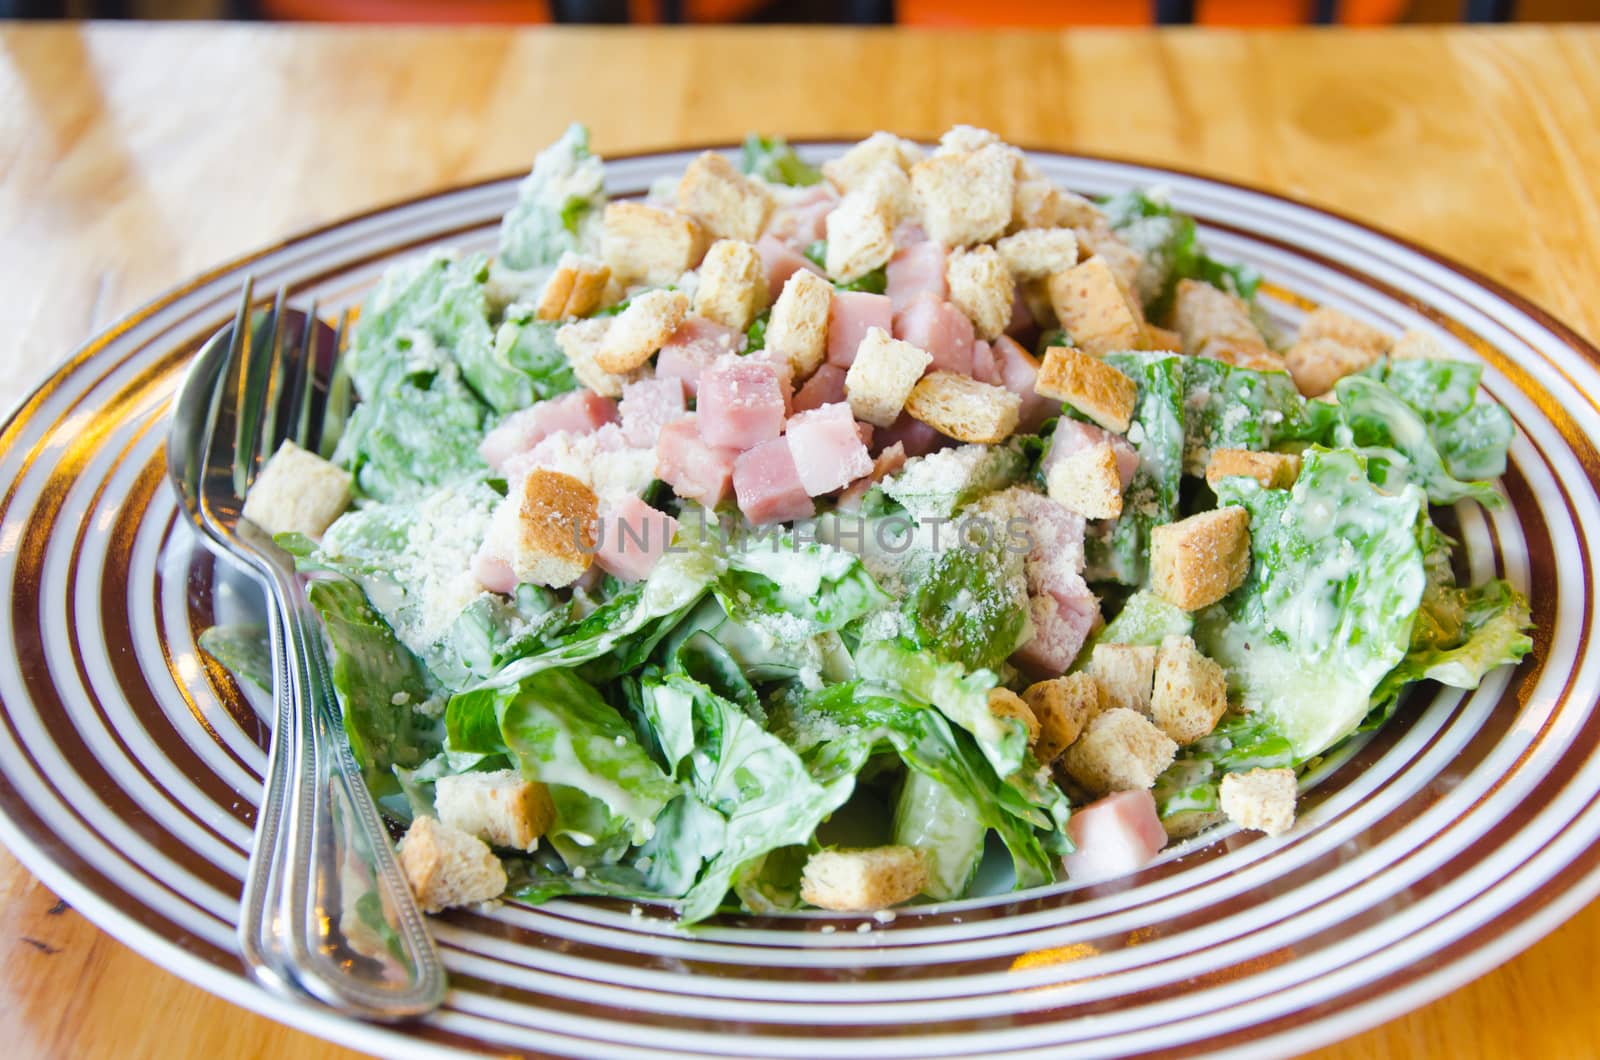 A Caesar salad is a salad of romaine lettuce and croutons dressed with parmesan cheese, lemon juice, olive oil,egg and etc.